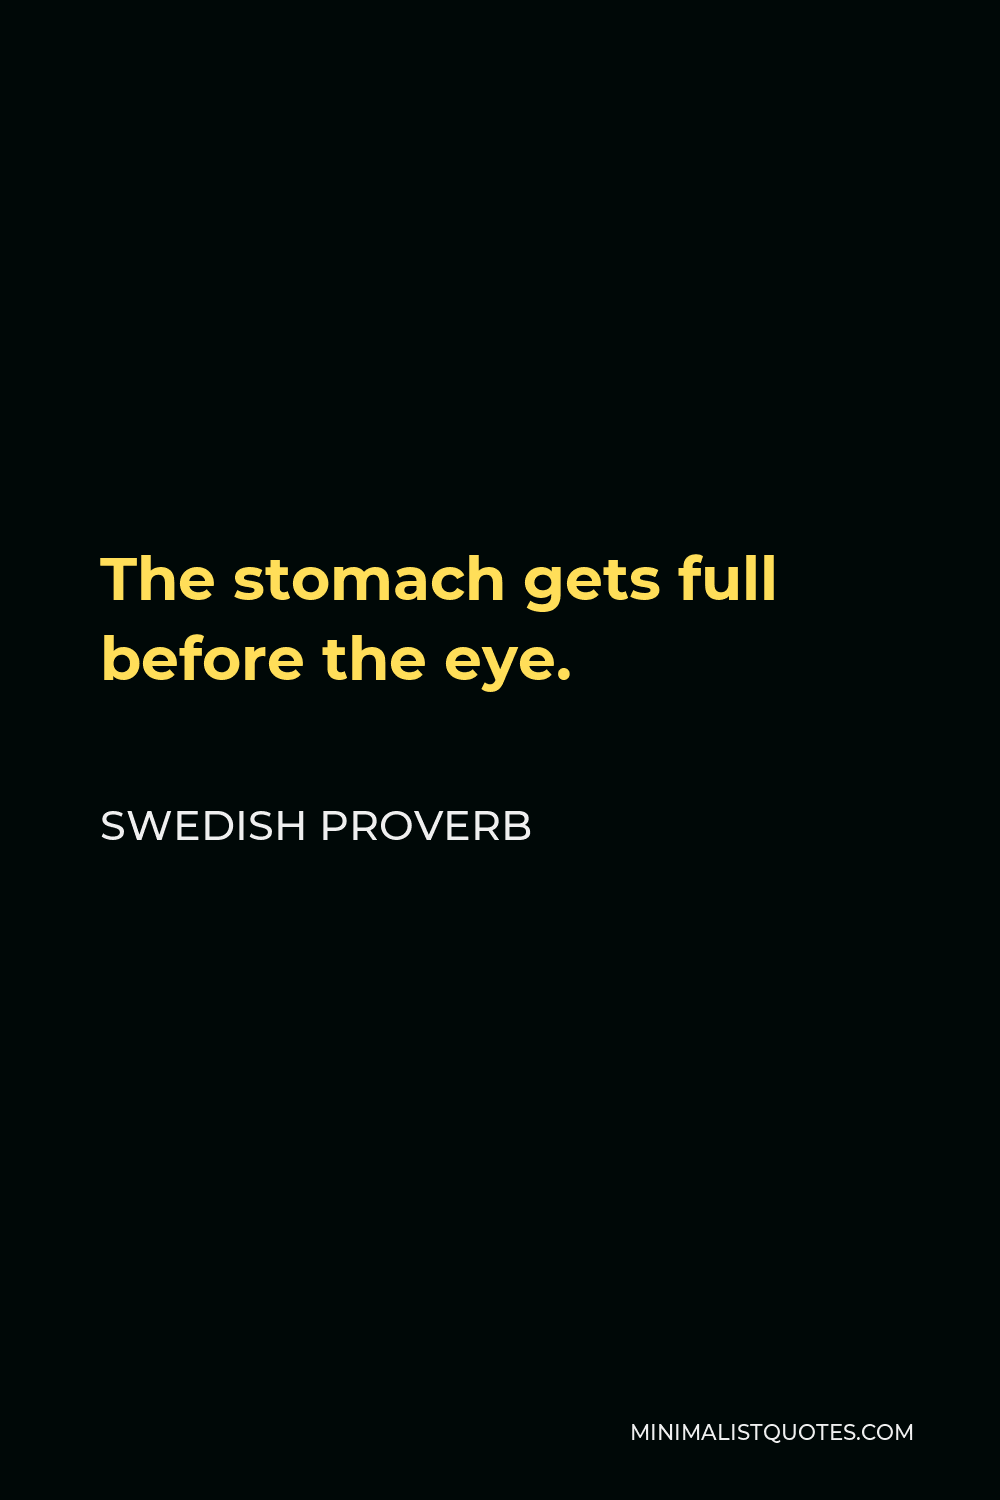 Swedish Proverb Quote - The stomach gets full before the eye.